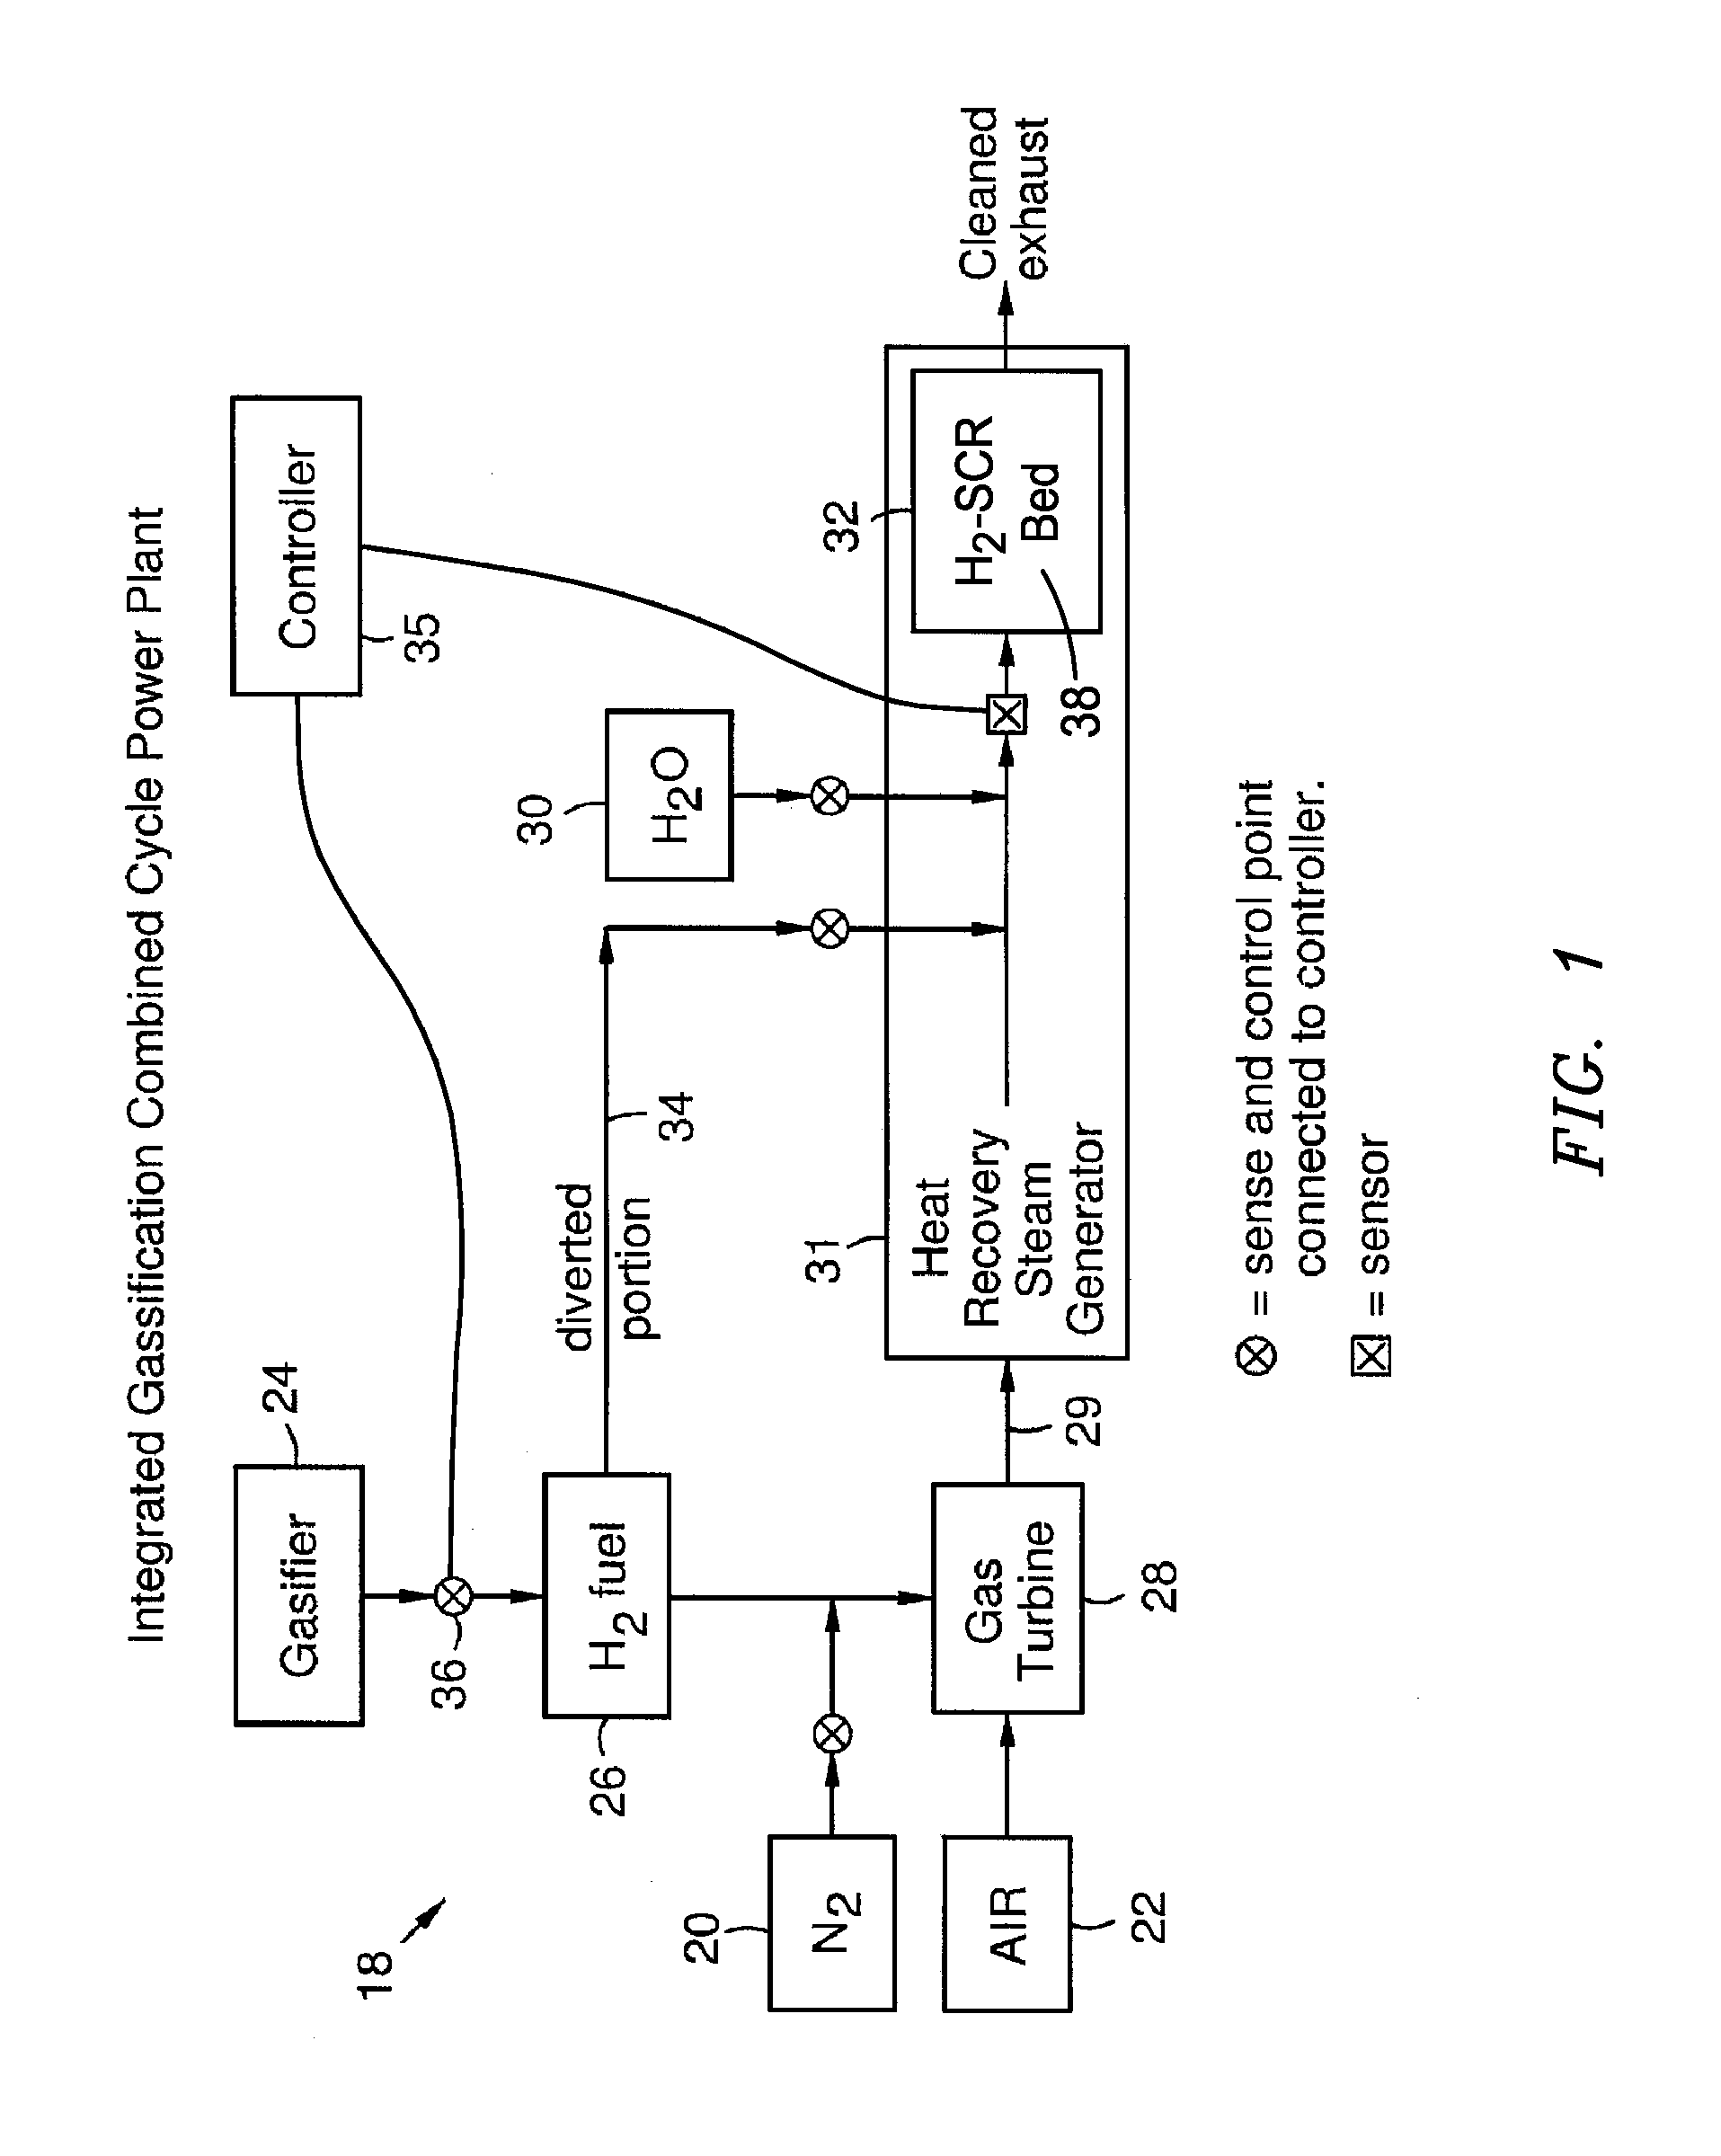 Selective Catalytic Reduction System and Process for Treating NOx Emissions Using a Palladium and Rhodium or Ruthenium Catalyst